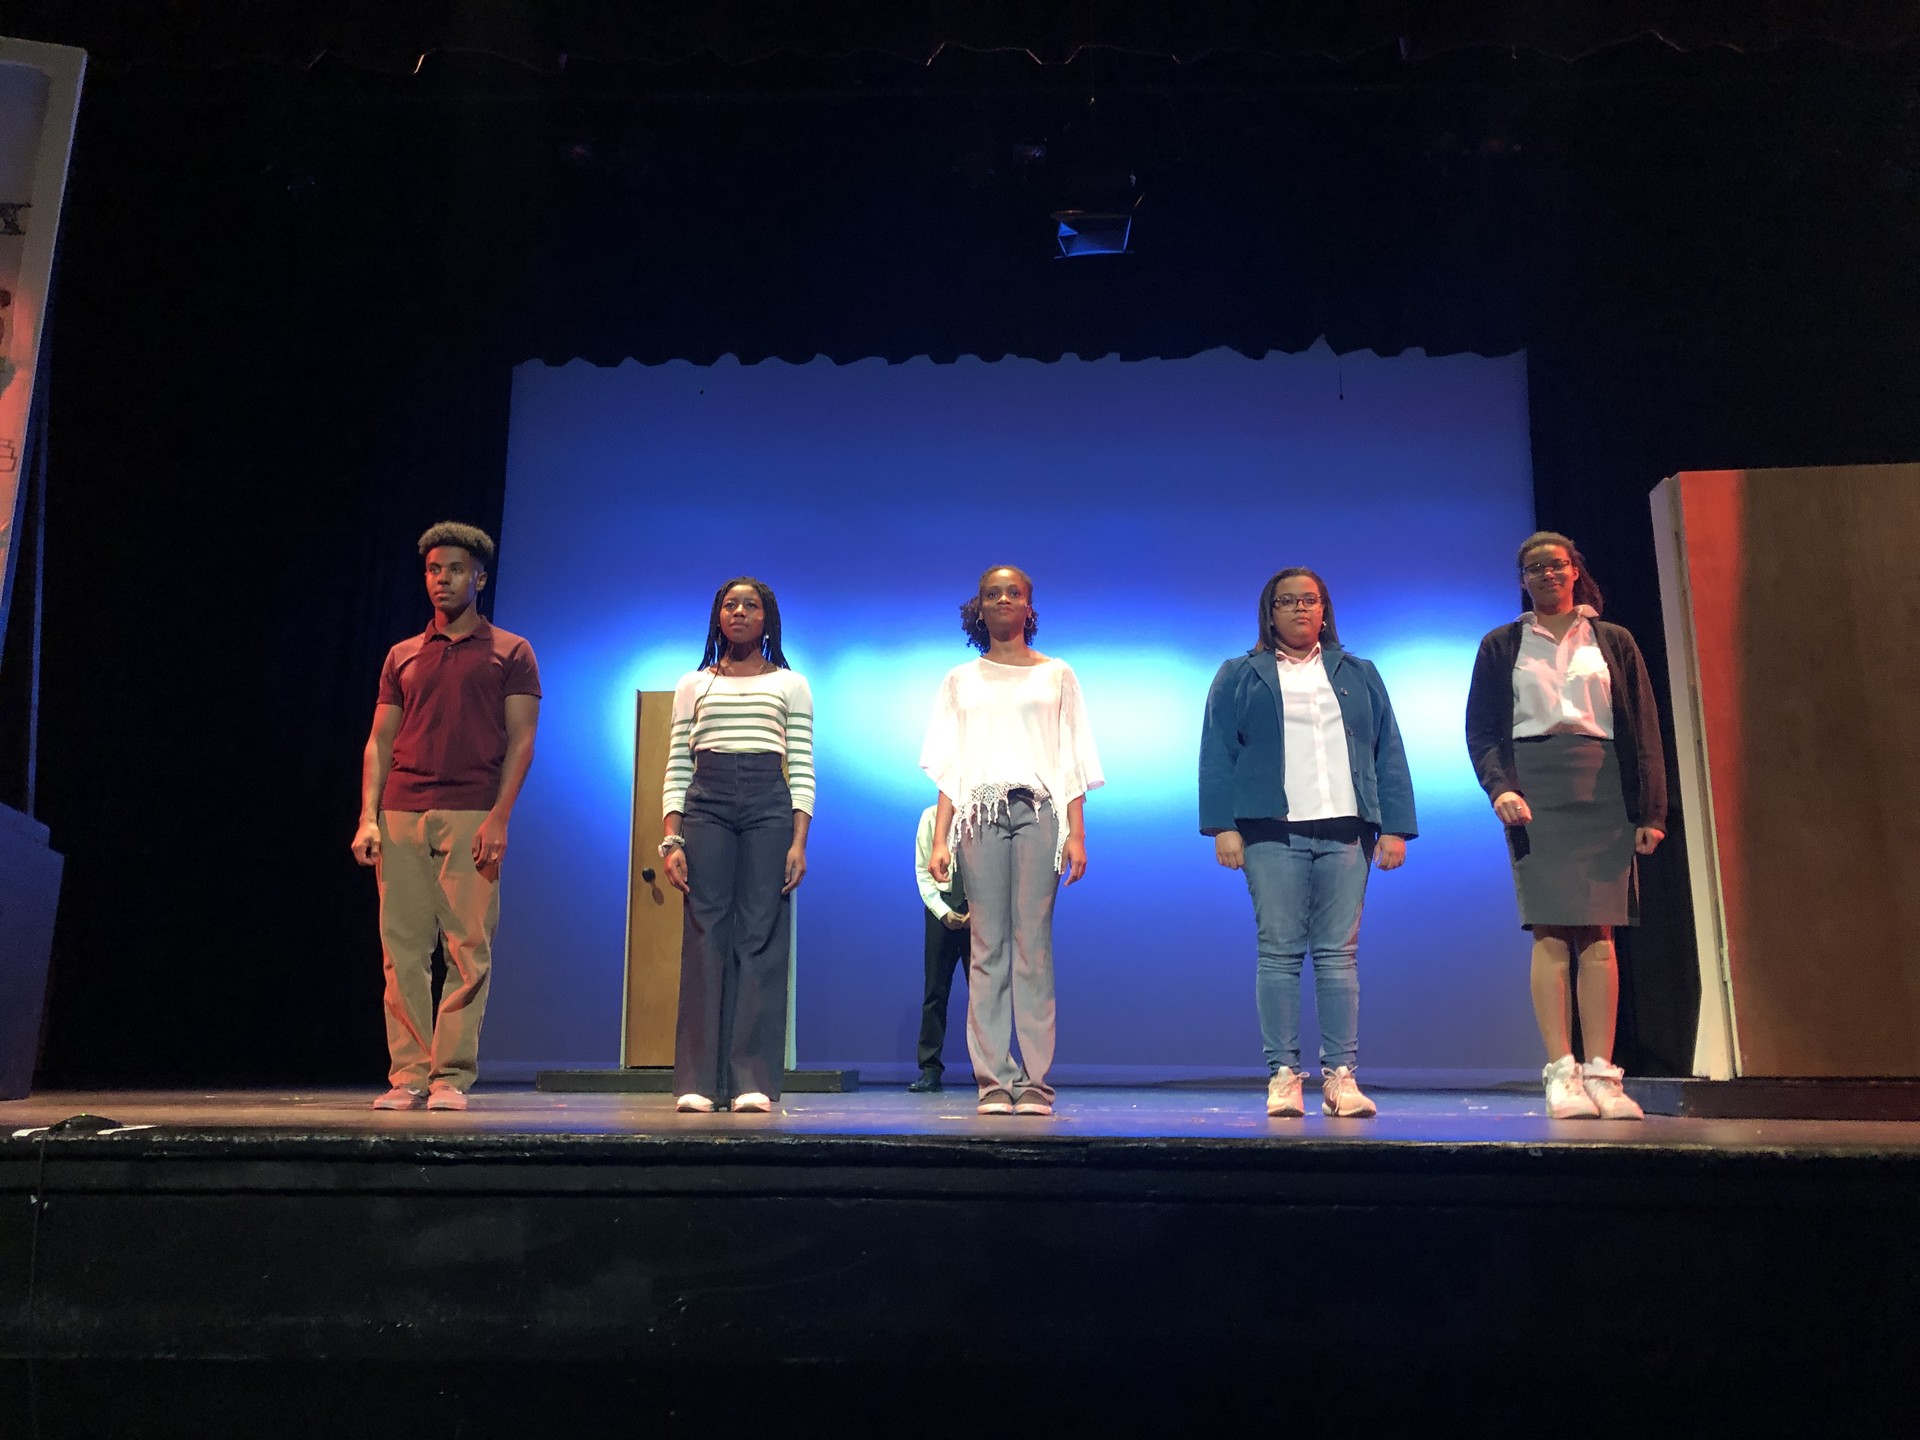 The lead actors in "The Apollos", a new play written, performed and produced by Oakland Technical High School students.